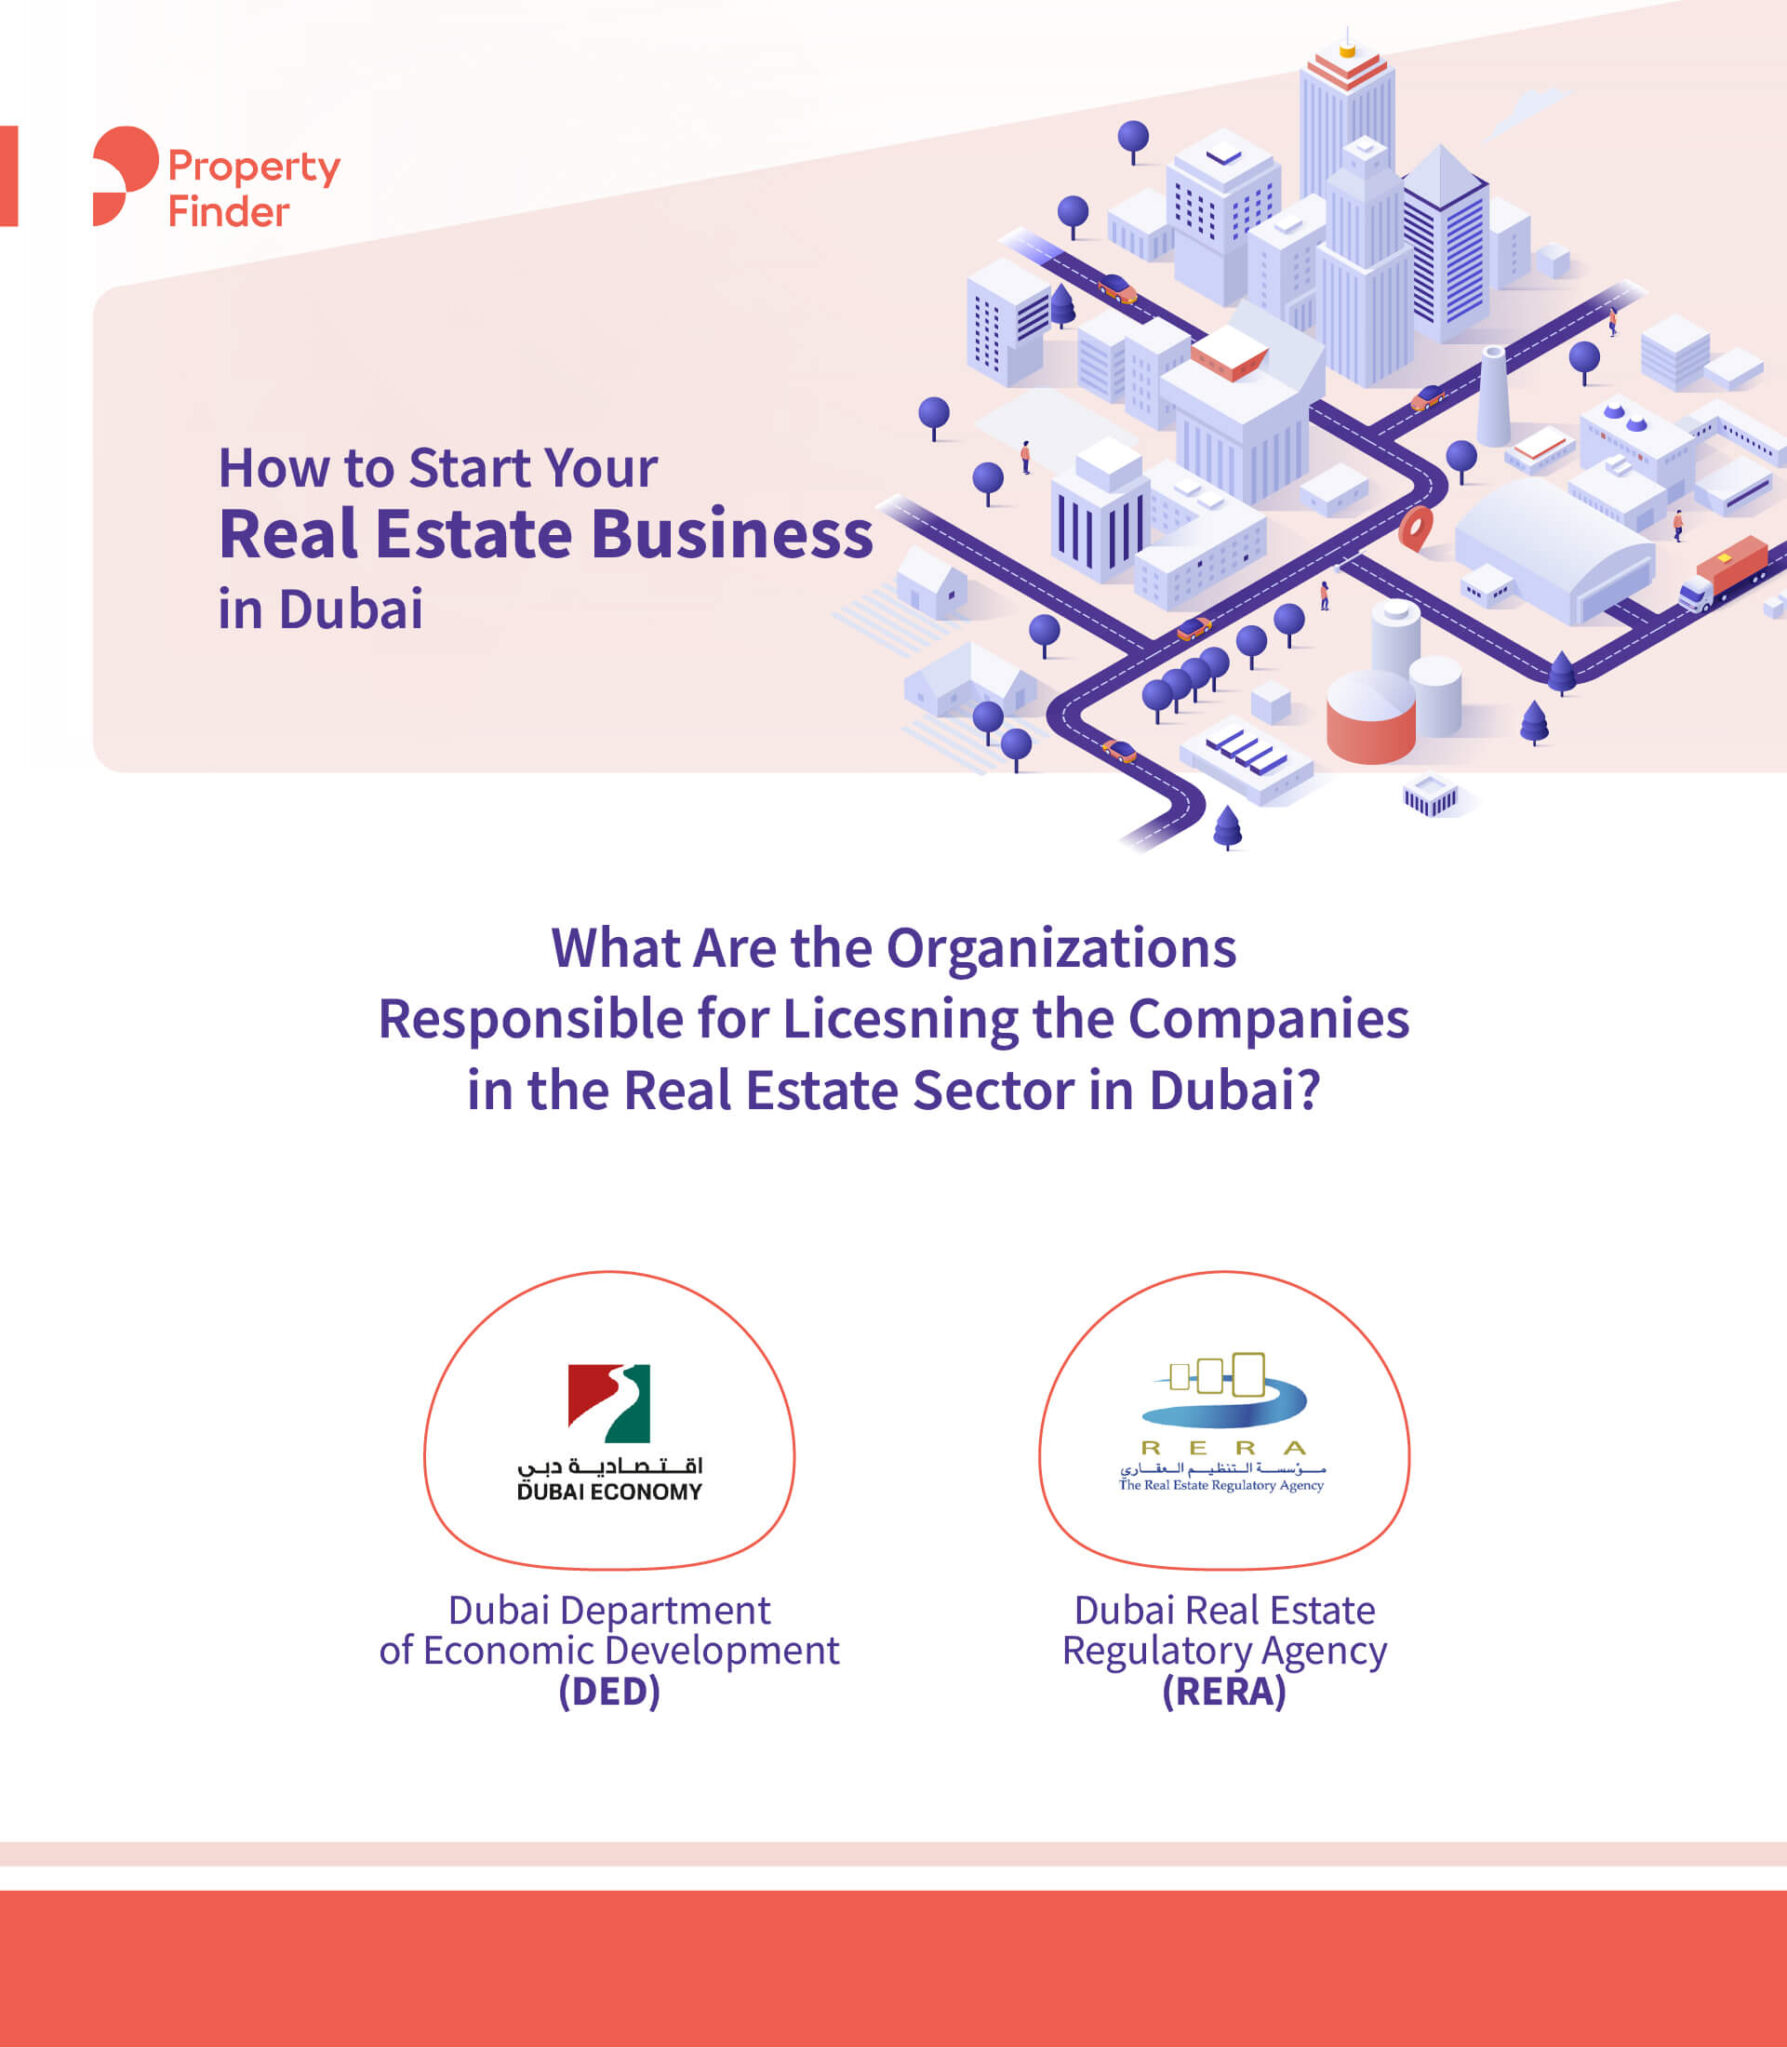 How to Start Your Real Estate Business in Dubai?